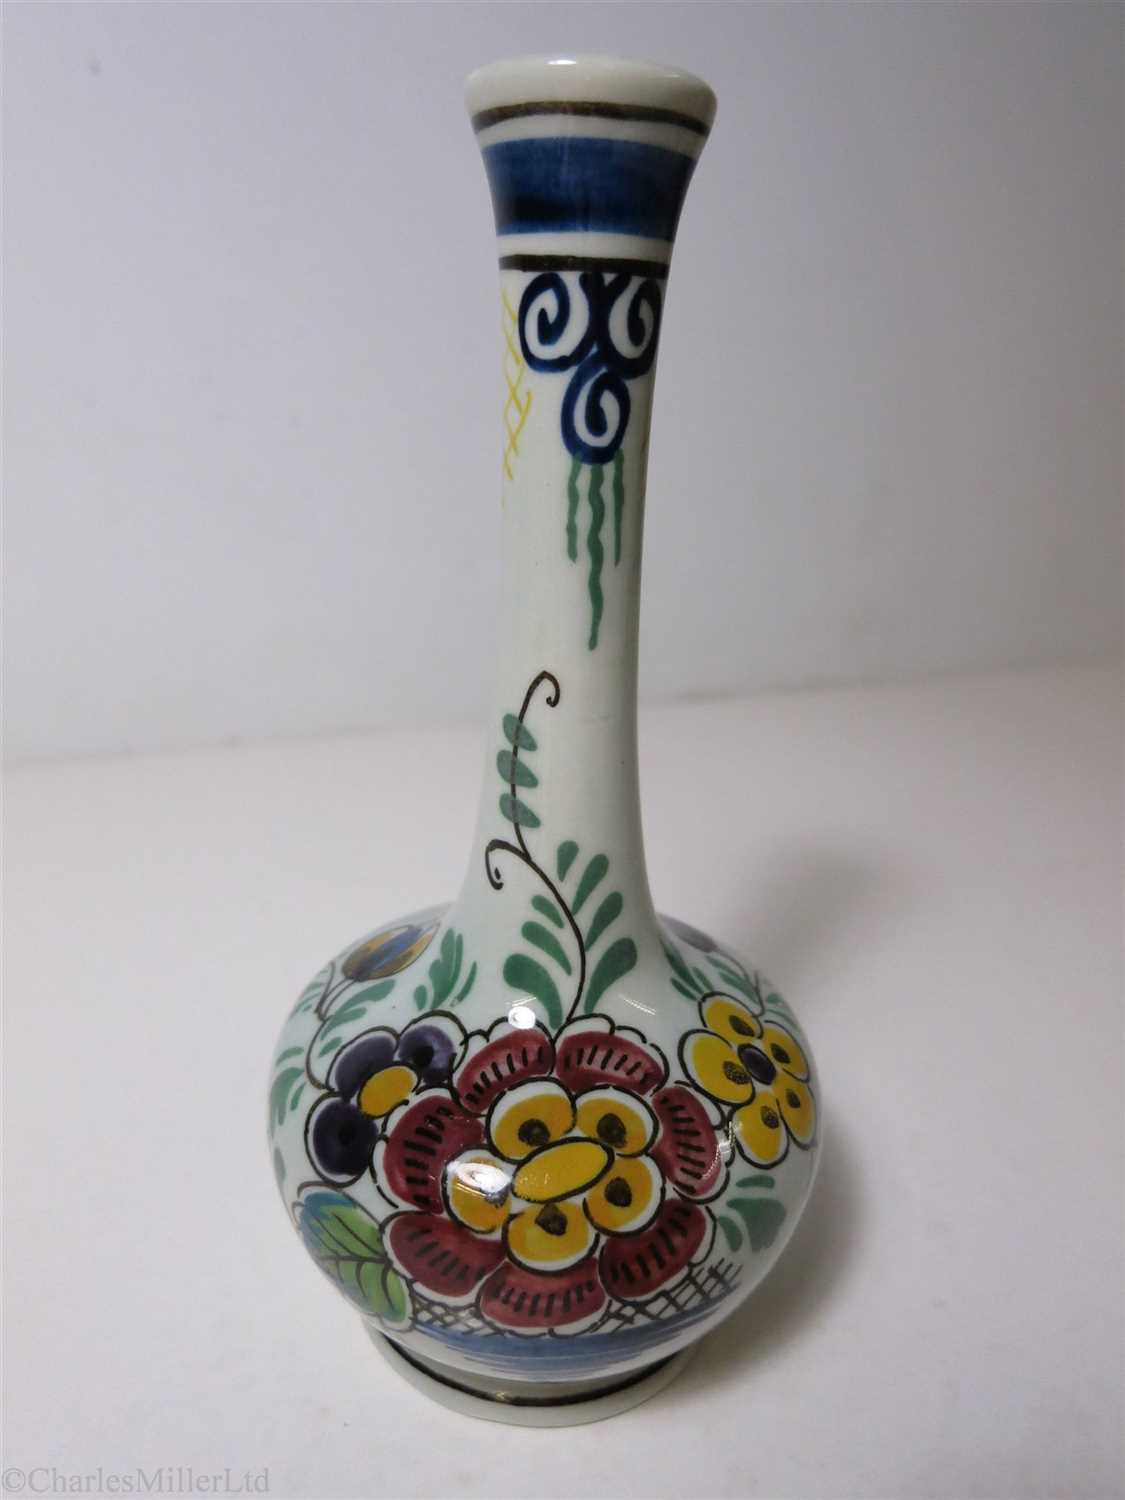 Lot 59 - HOLLAND AFRICA LINE [VNS]: A SMALL CHINA BUD VASE BY DELFT, CIRCA 1935